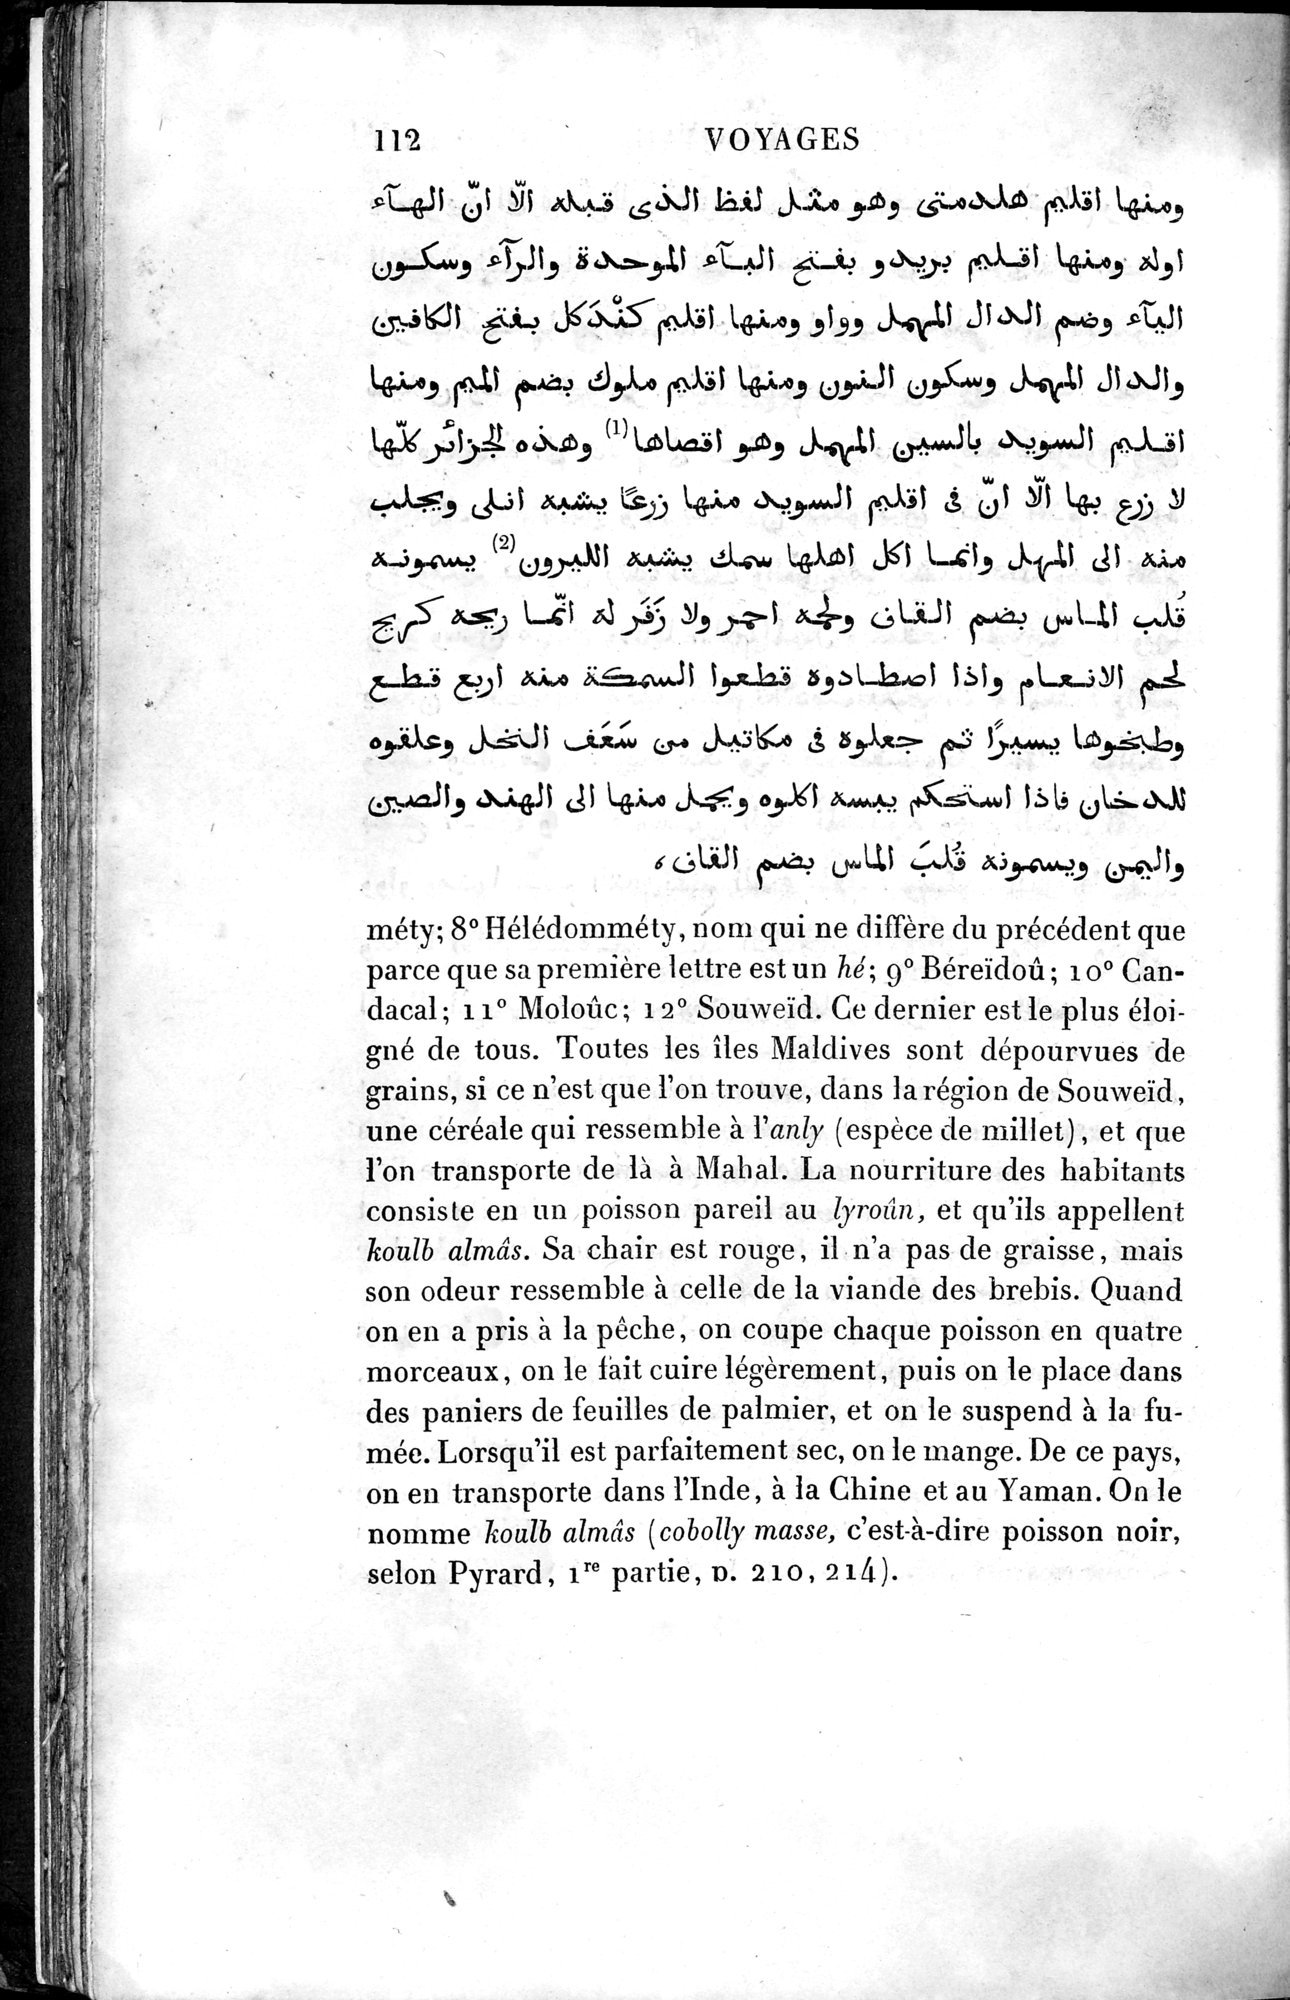 Voyages d'Ibn Batoutah : vol.4 / Page 124 (Grayscale High Resolution Image)